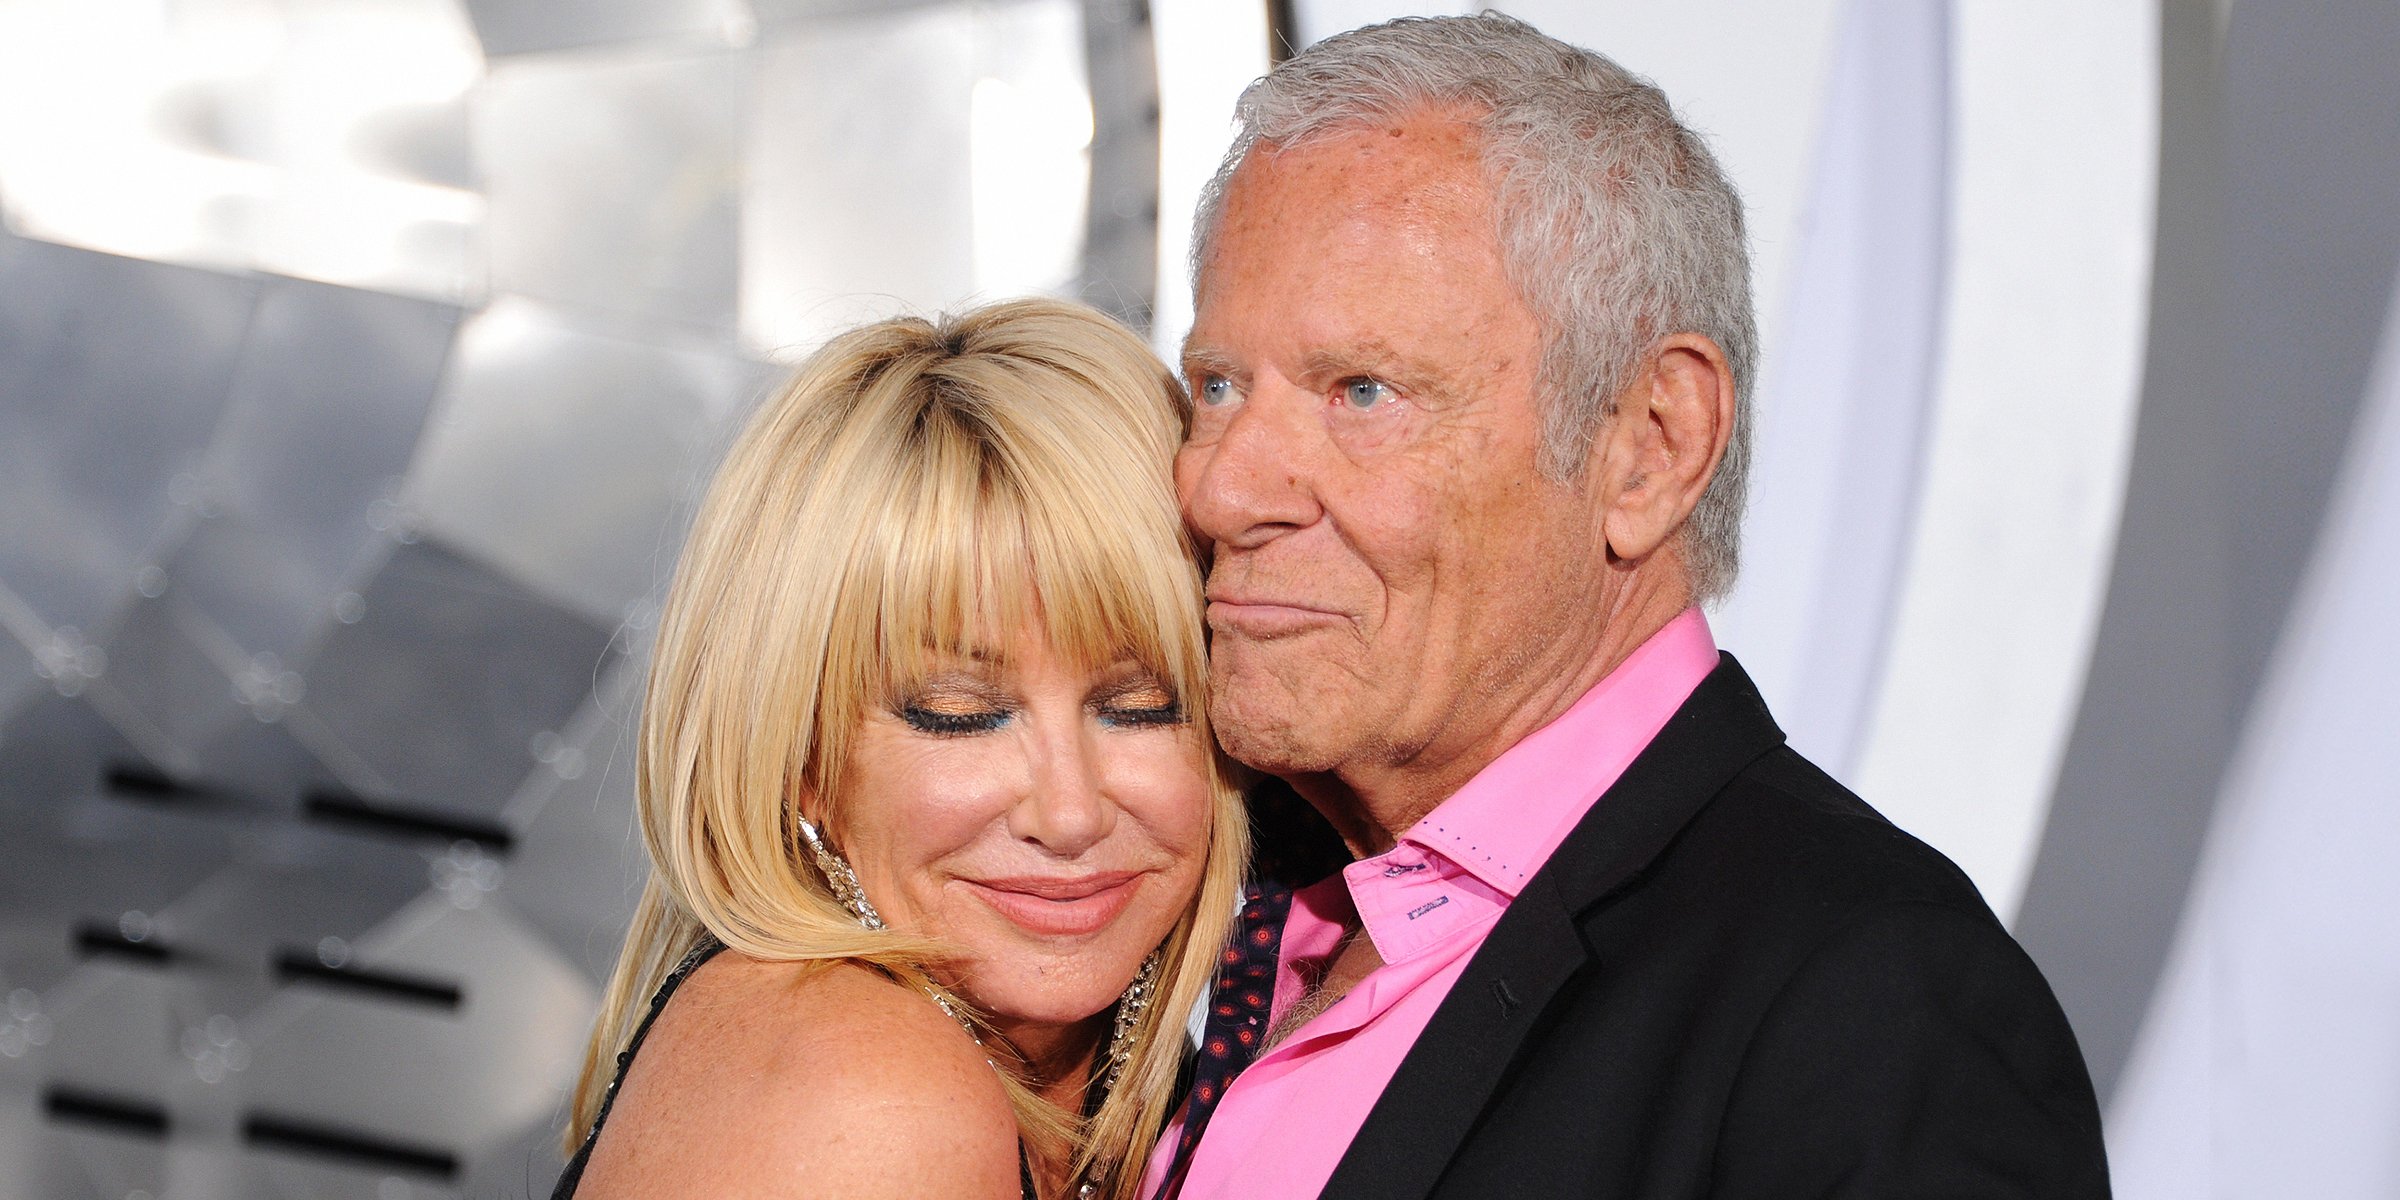 Suzanne Somers and her husband, Alan Hamel | Source: Getty Images